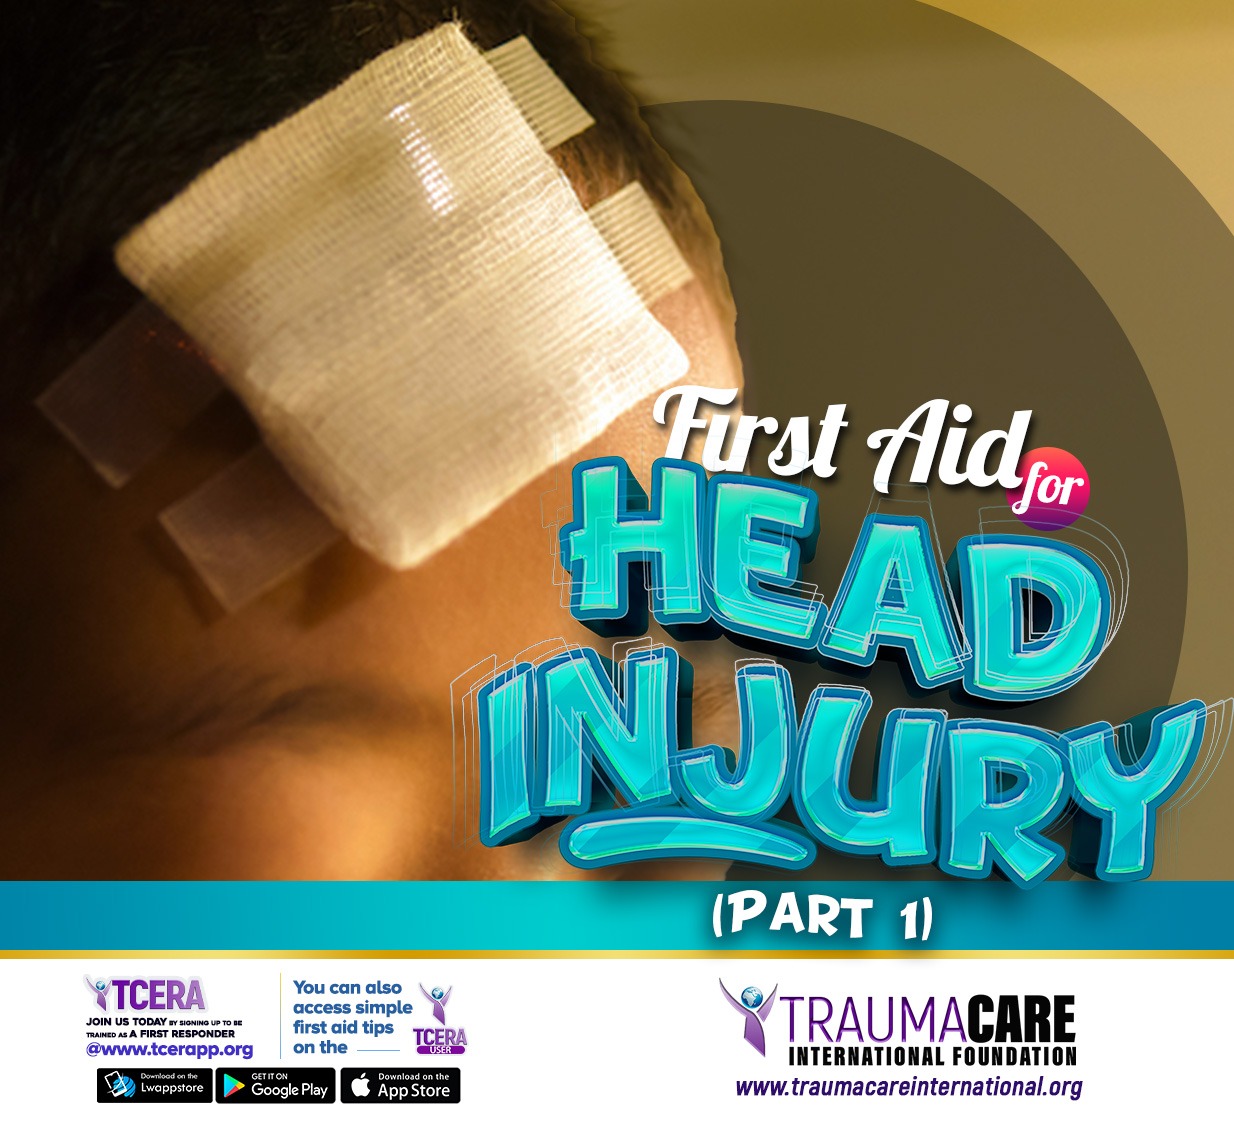 FIRST AID FOR HEAD INJURY (CONSCIOUS CASUALTY) PART 1